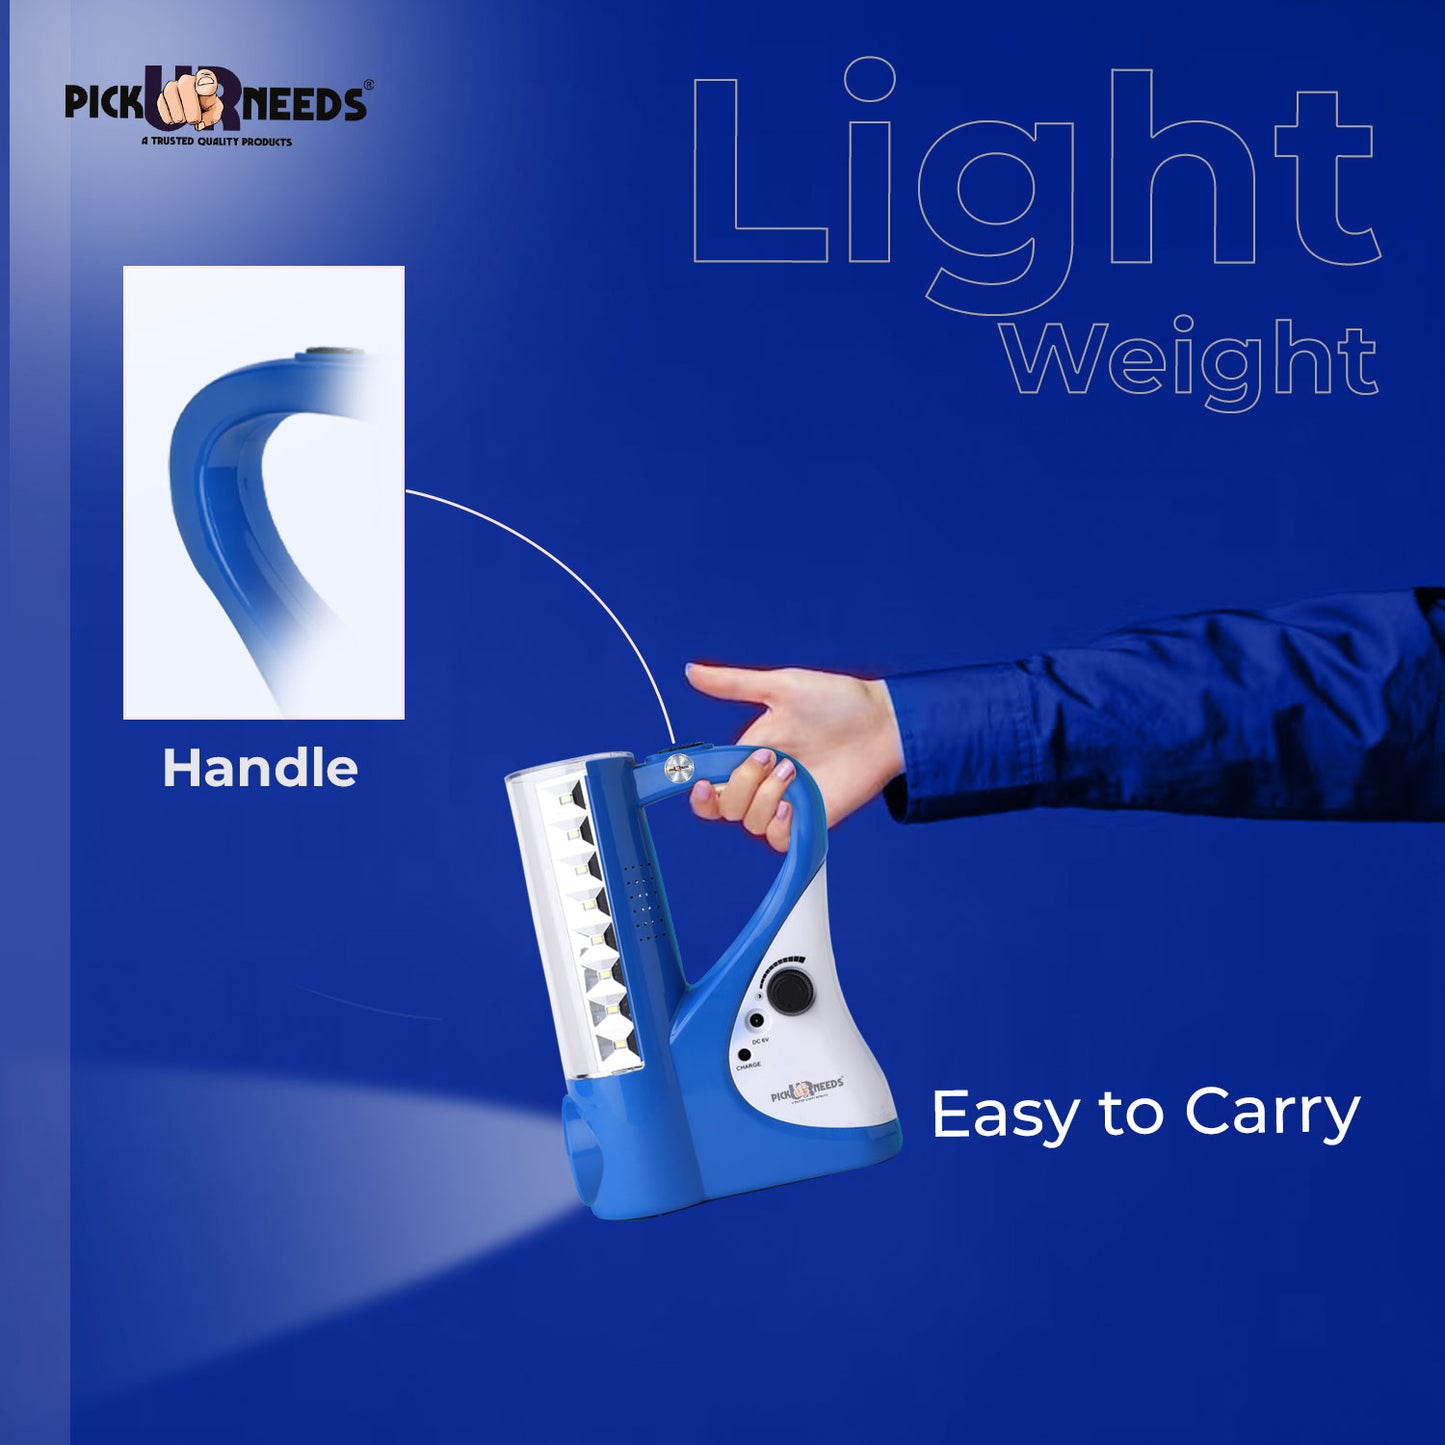 Pick Ur Needs Rechargeable Emergency 2 In 1 Home LED Torch Lantern Lamp Light with 24 SMD Light